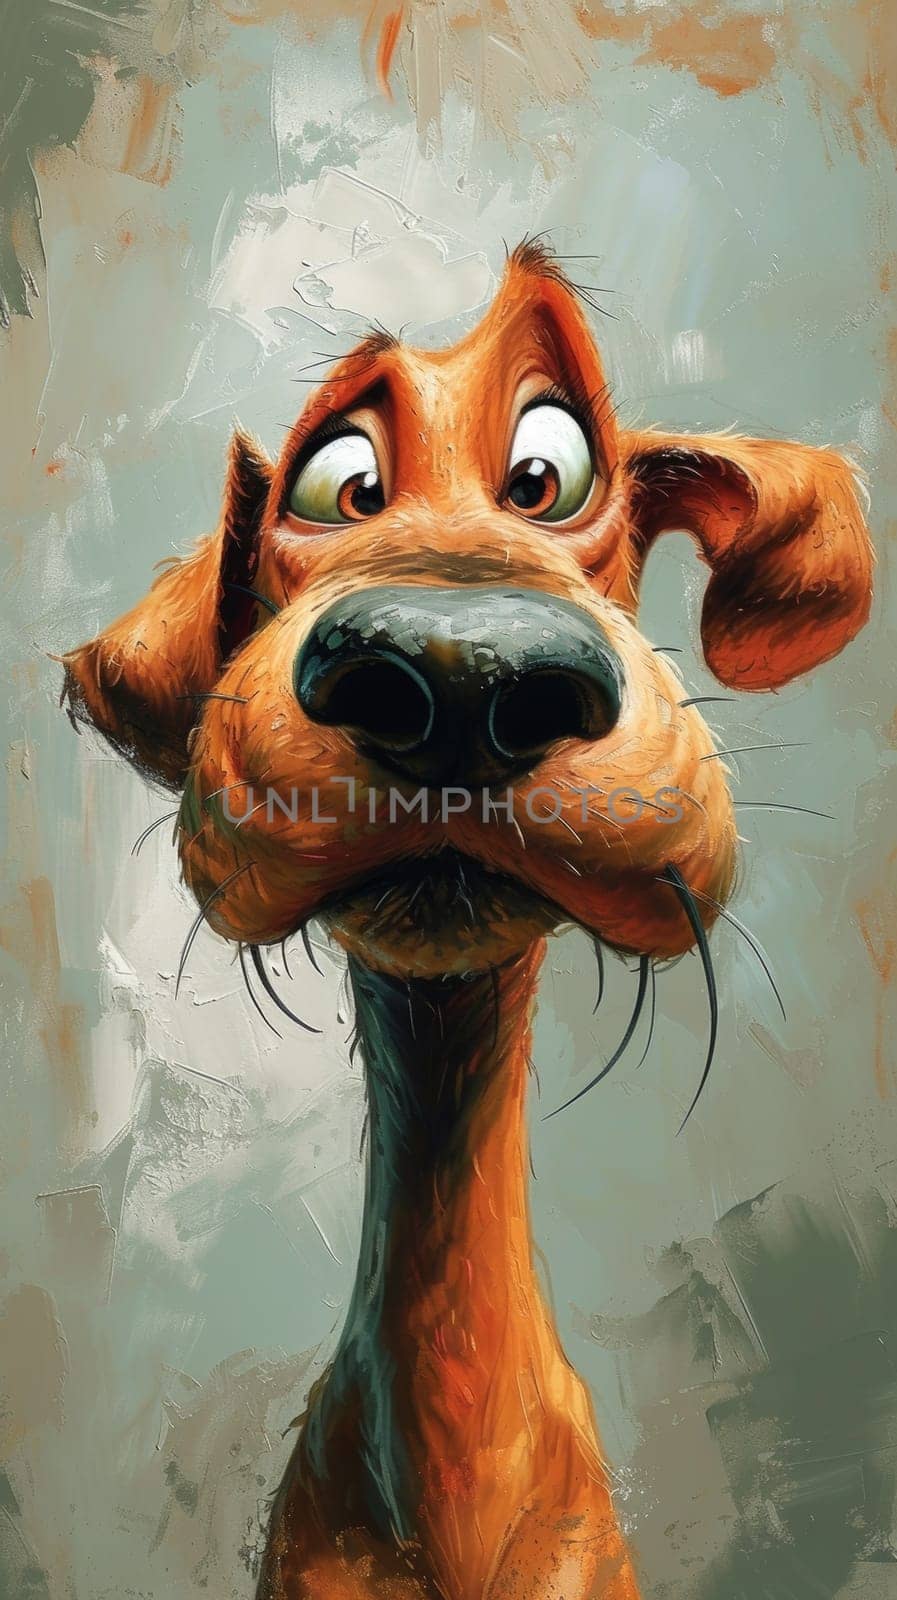 A painting of a dog with big eyes and an expression, AI by starush